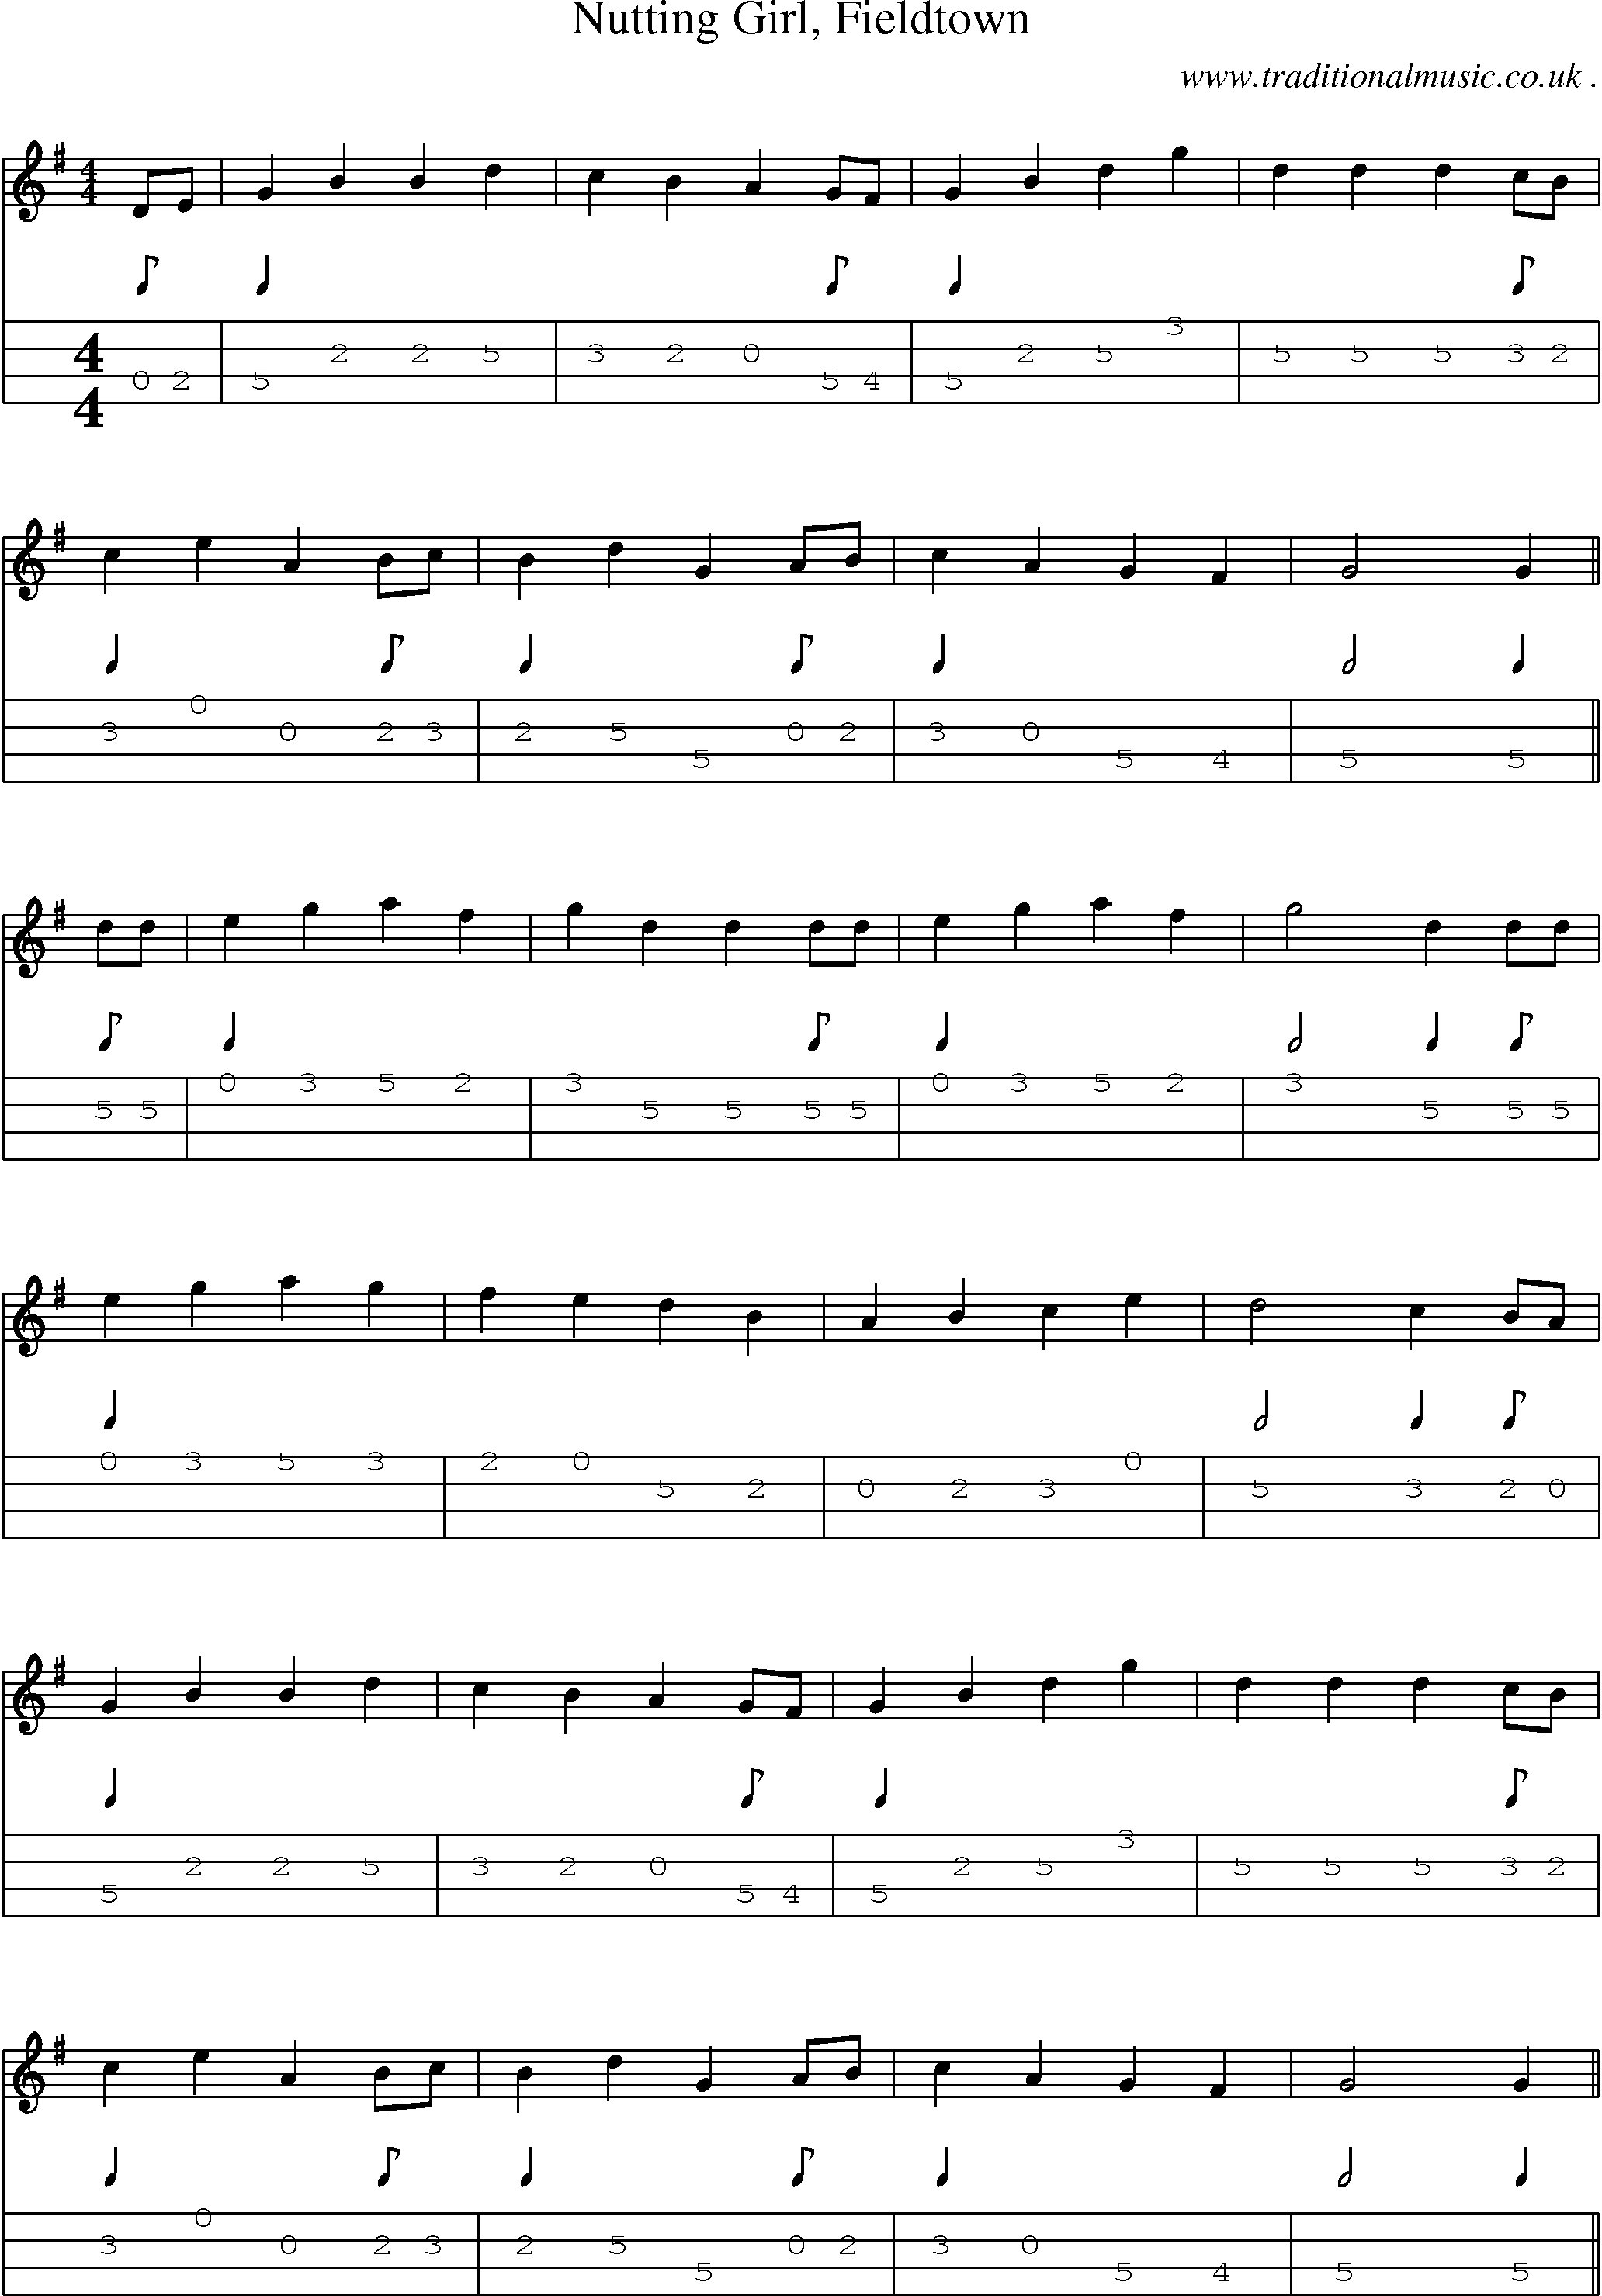 Sheet-Music and Mandolin Tabs for Nutting Girl Fieldtown